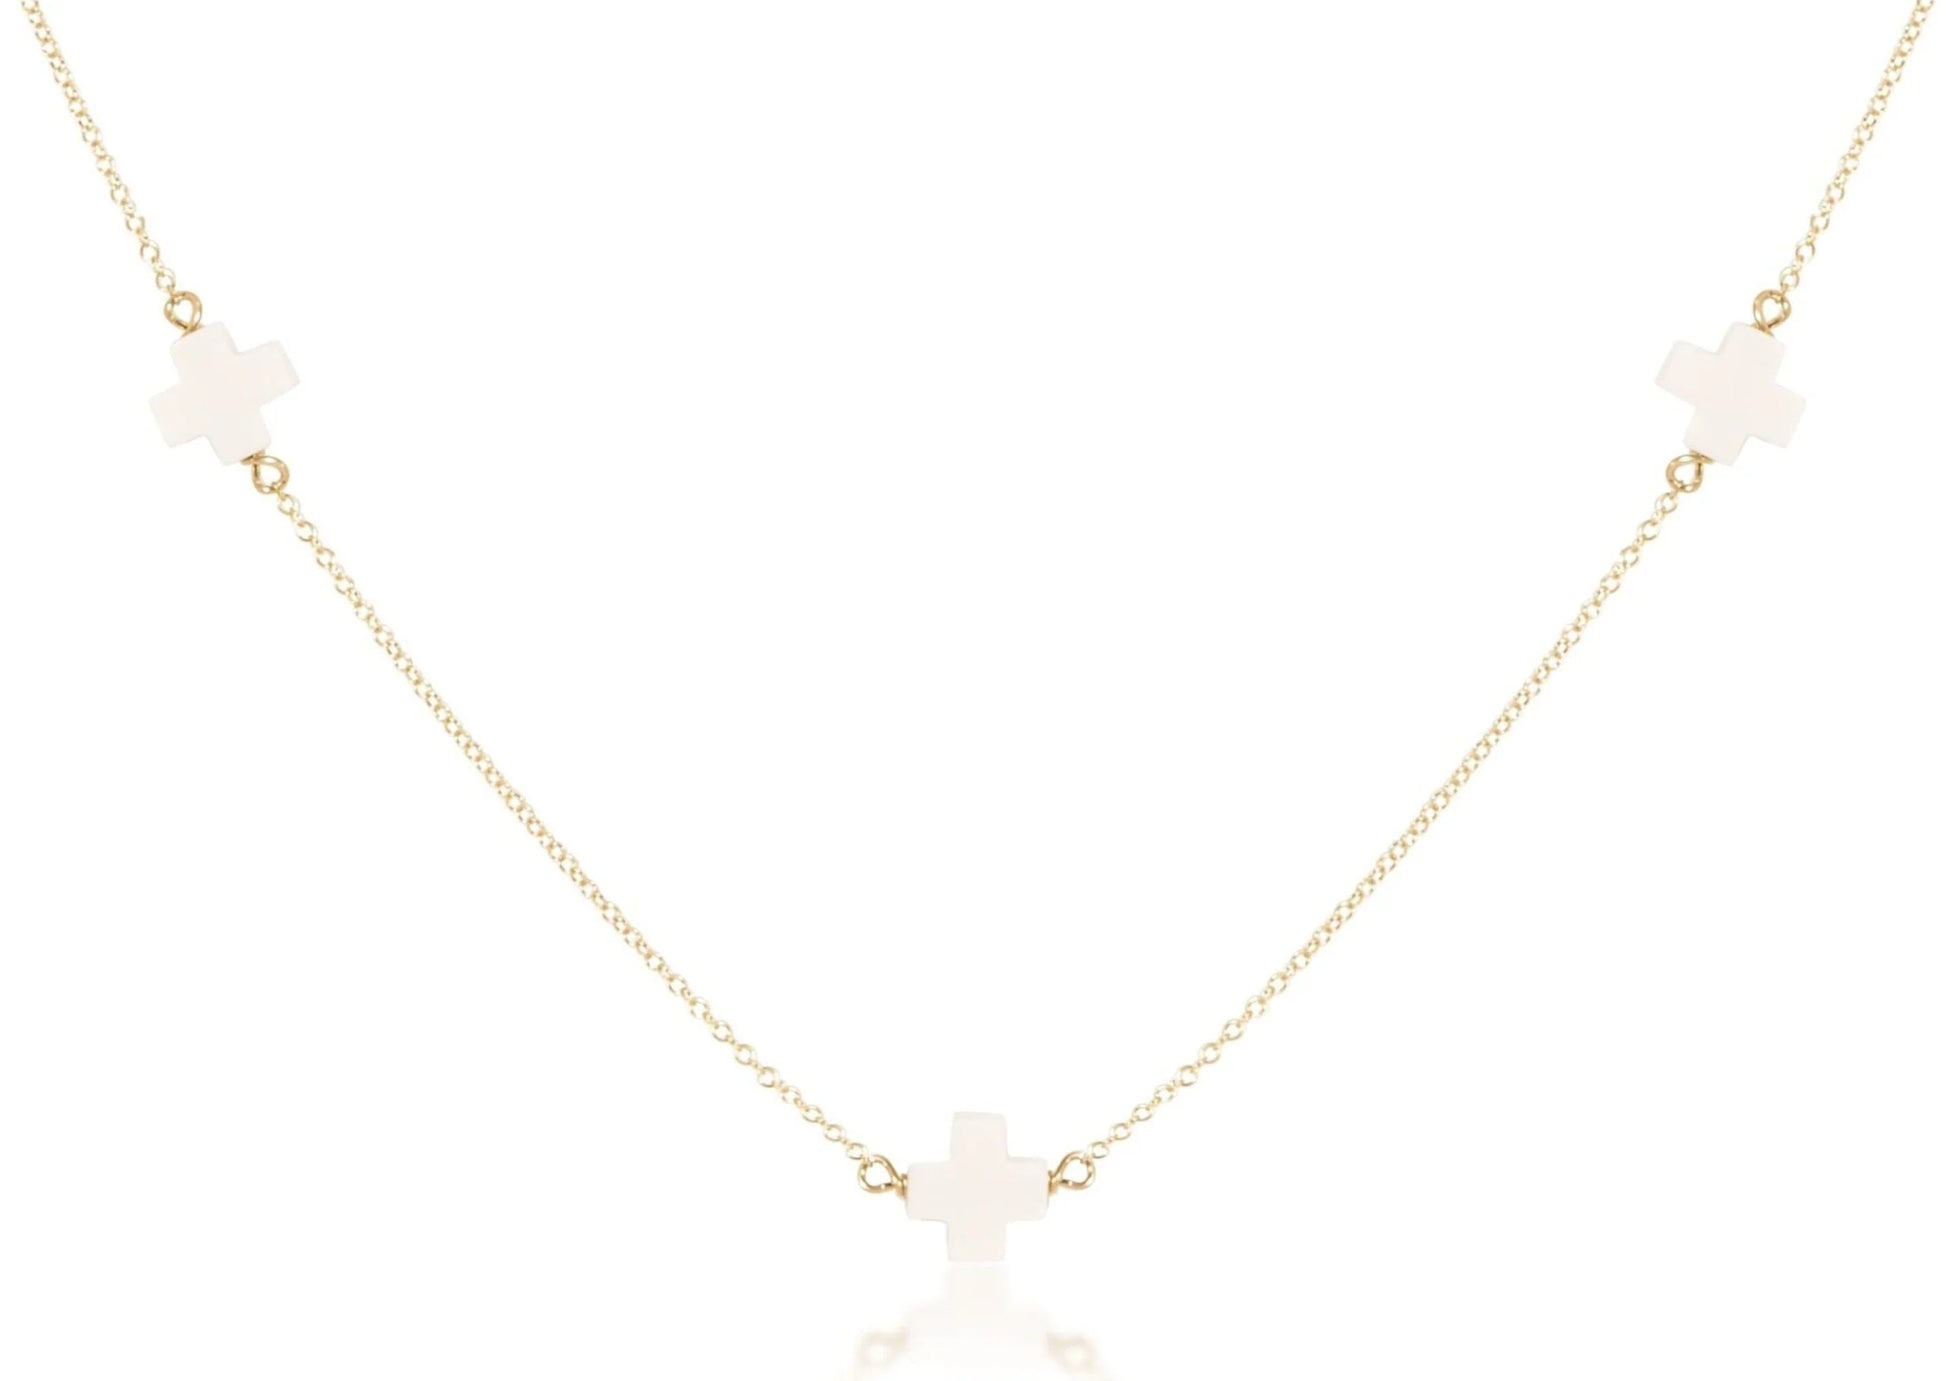 17" Choker Simplicity Chain Gold - Signature Cross Off White by eNewton. 14kt gold-filled chain and signature cross. Shop at The Painted Cottage in Edgewater, MD.